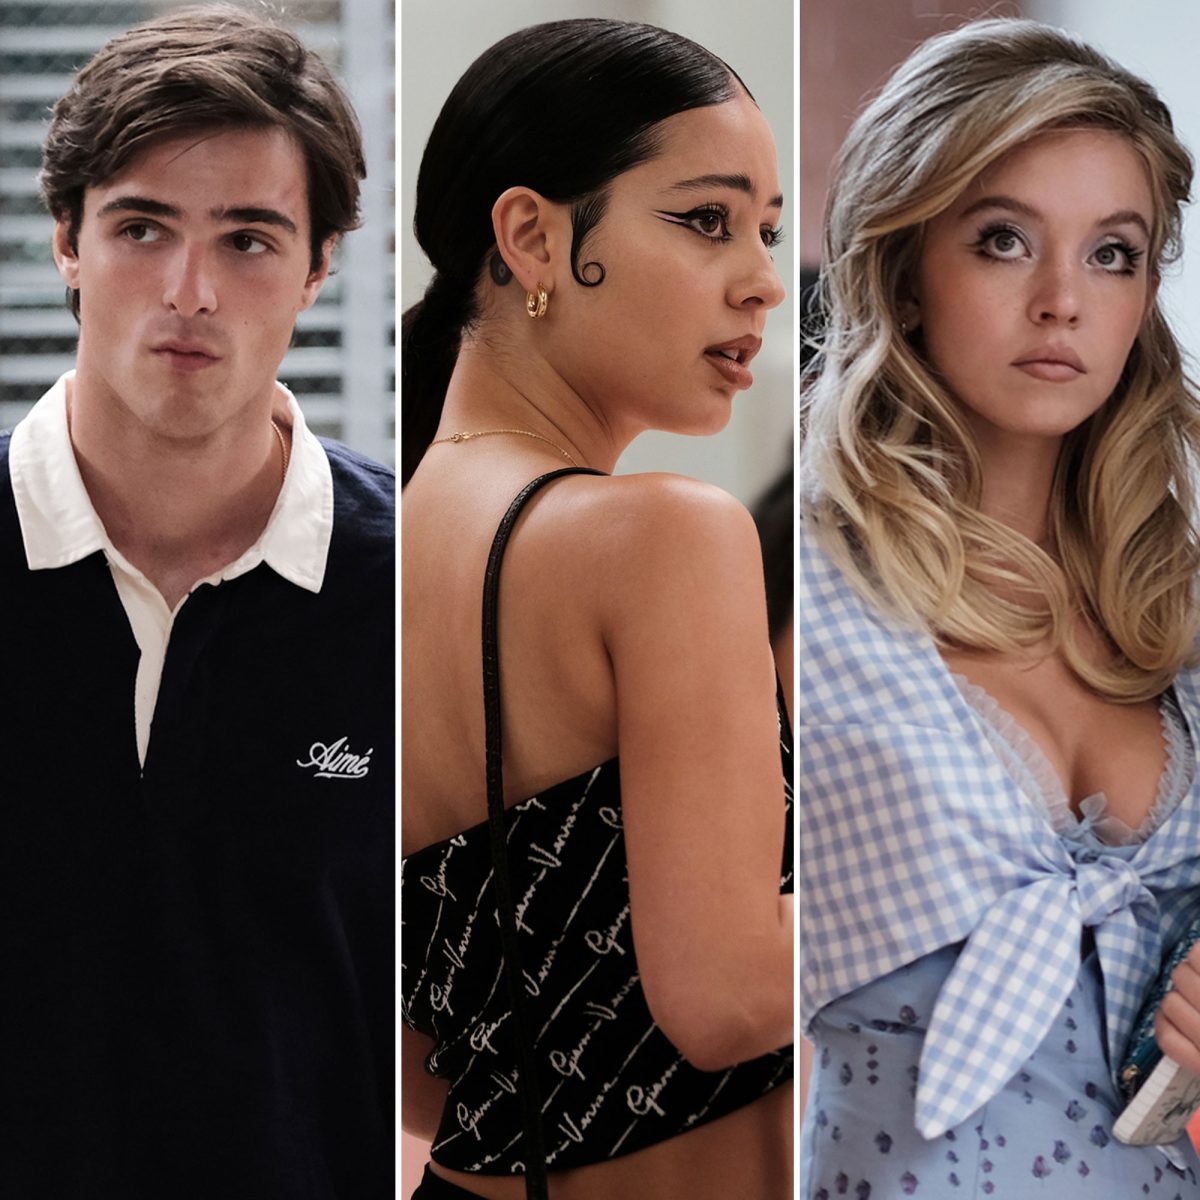 Euphoria': Nate, Maddy and Cassie's Love Triangle Timeline